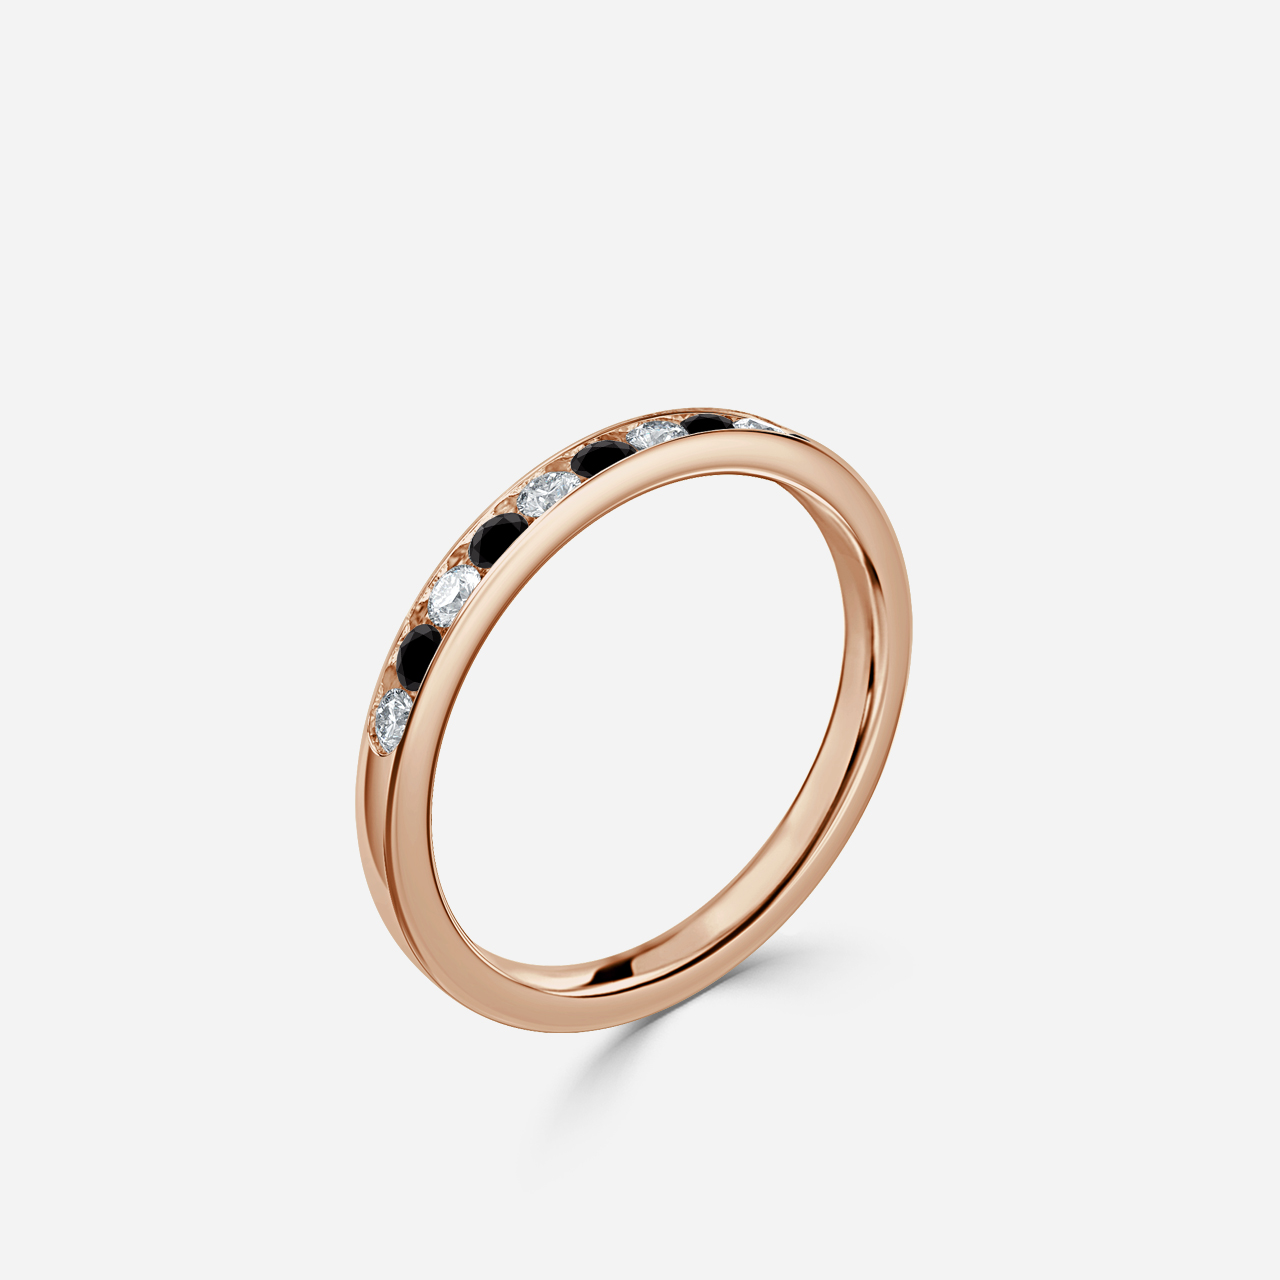 Channel Set White And Black Diamond Ring In Rose Gold